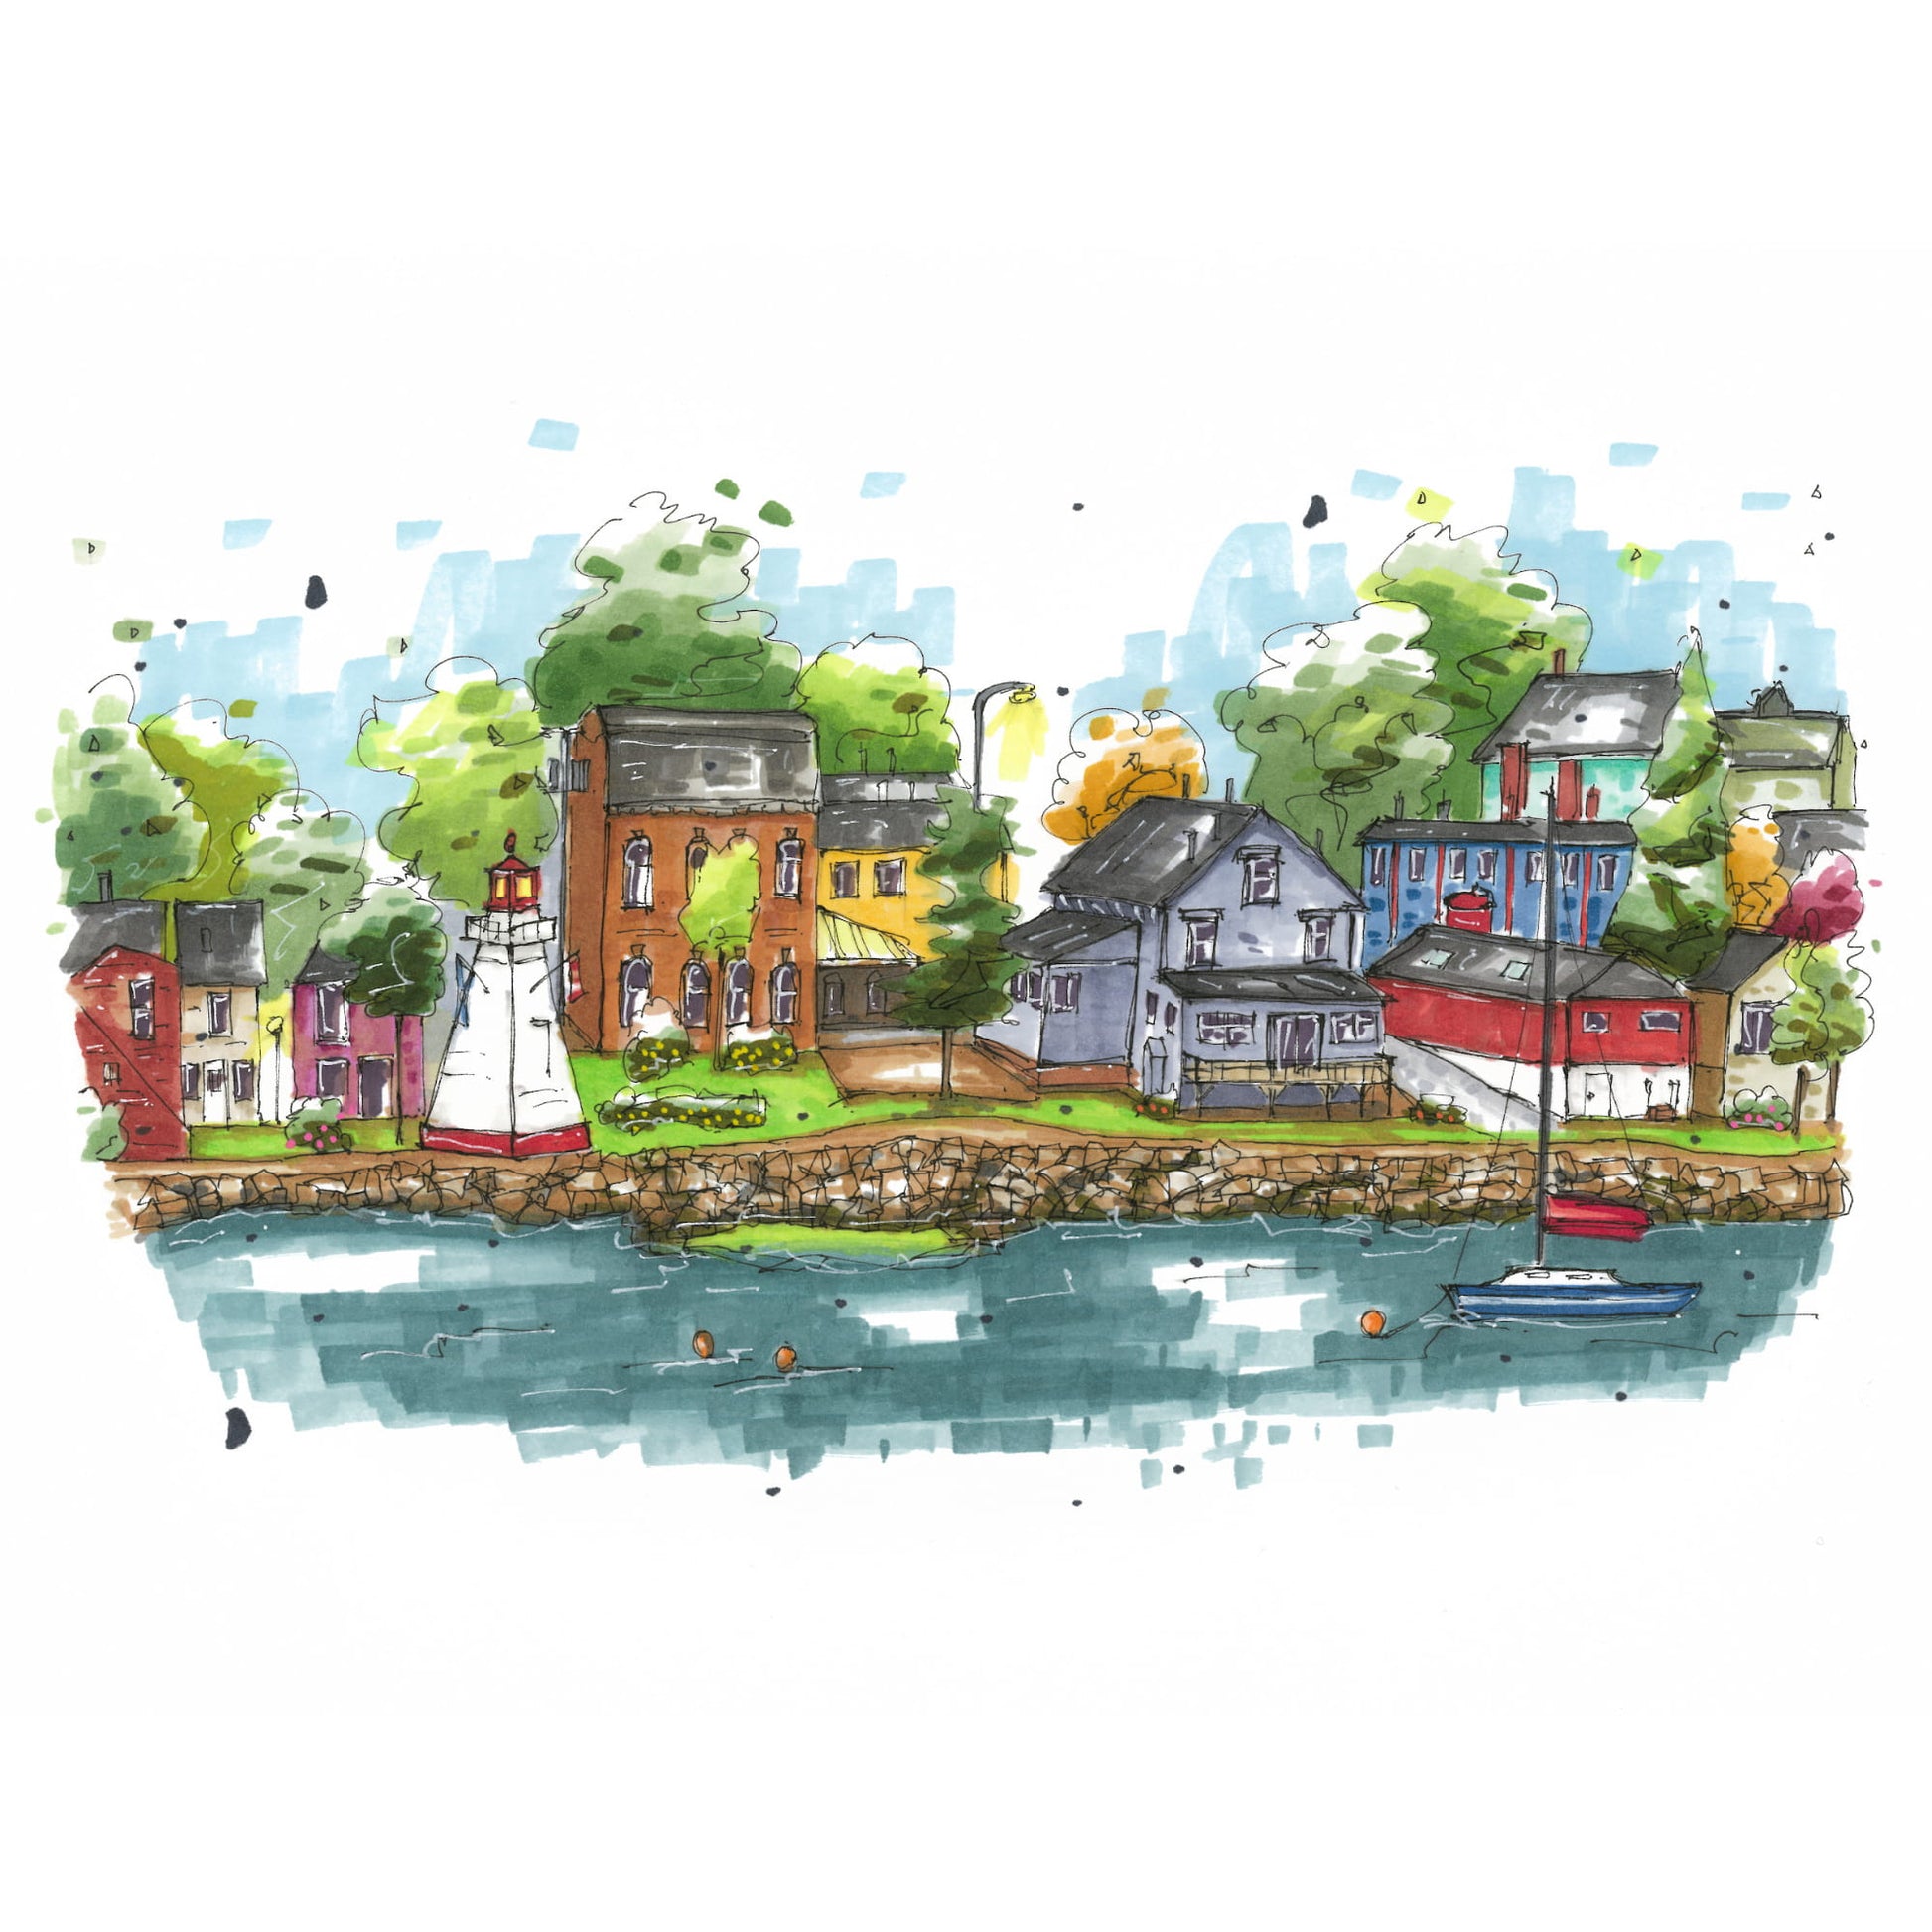 Annapolis Royal Waterfront, The Cradle of our Nation, Greeting Card, Urban Sketch, Greeting Card, Downtown Sketcher, Wynand van Niekerk